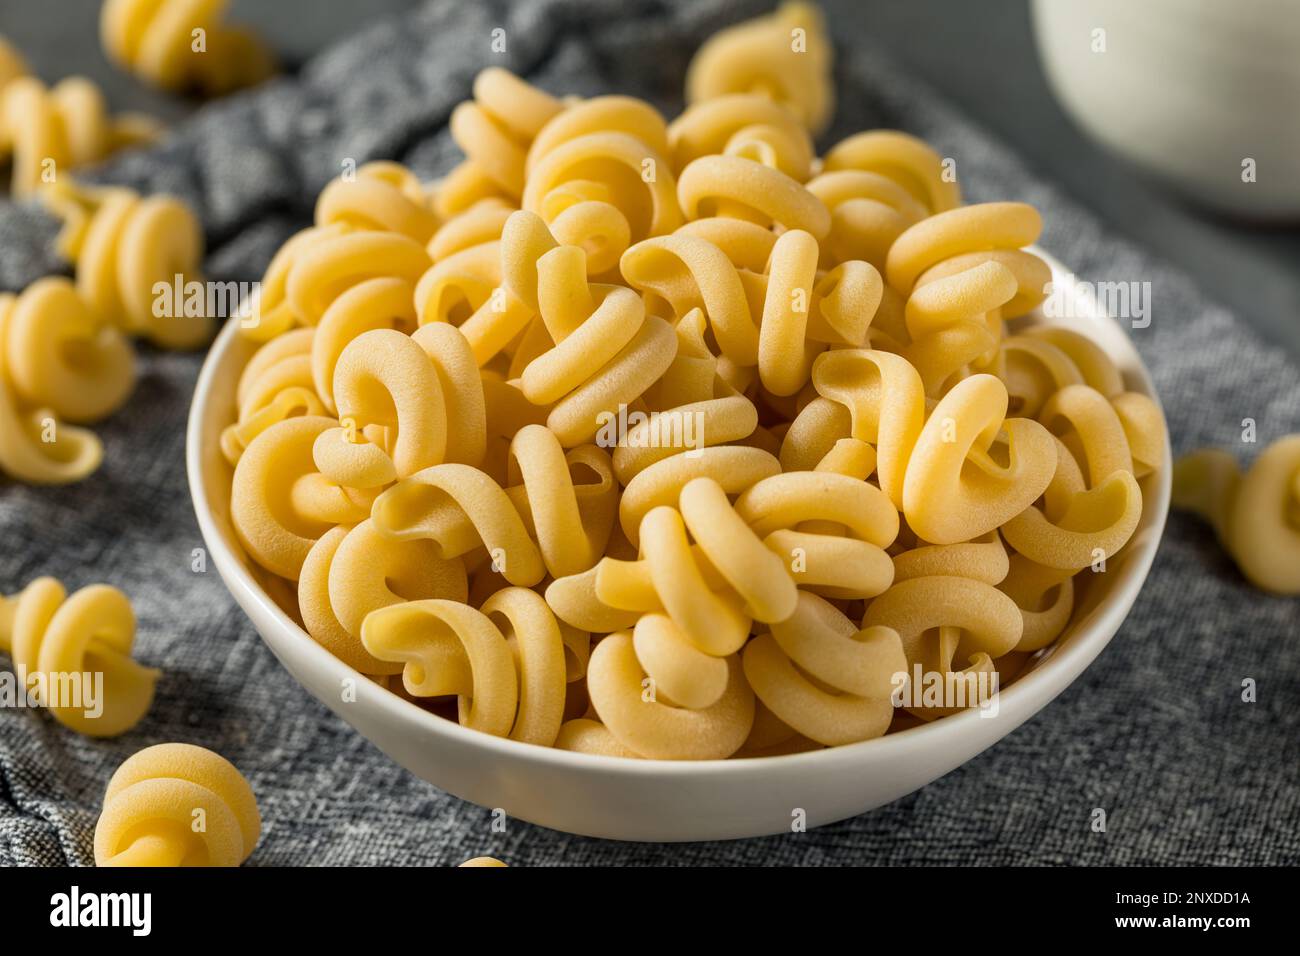 Homemade Dry Trottole Pasta in a Bowl Stock Photo - Alamy